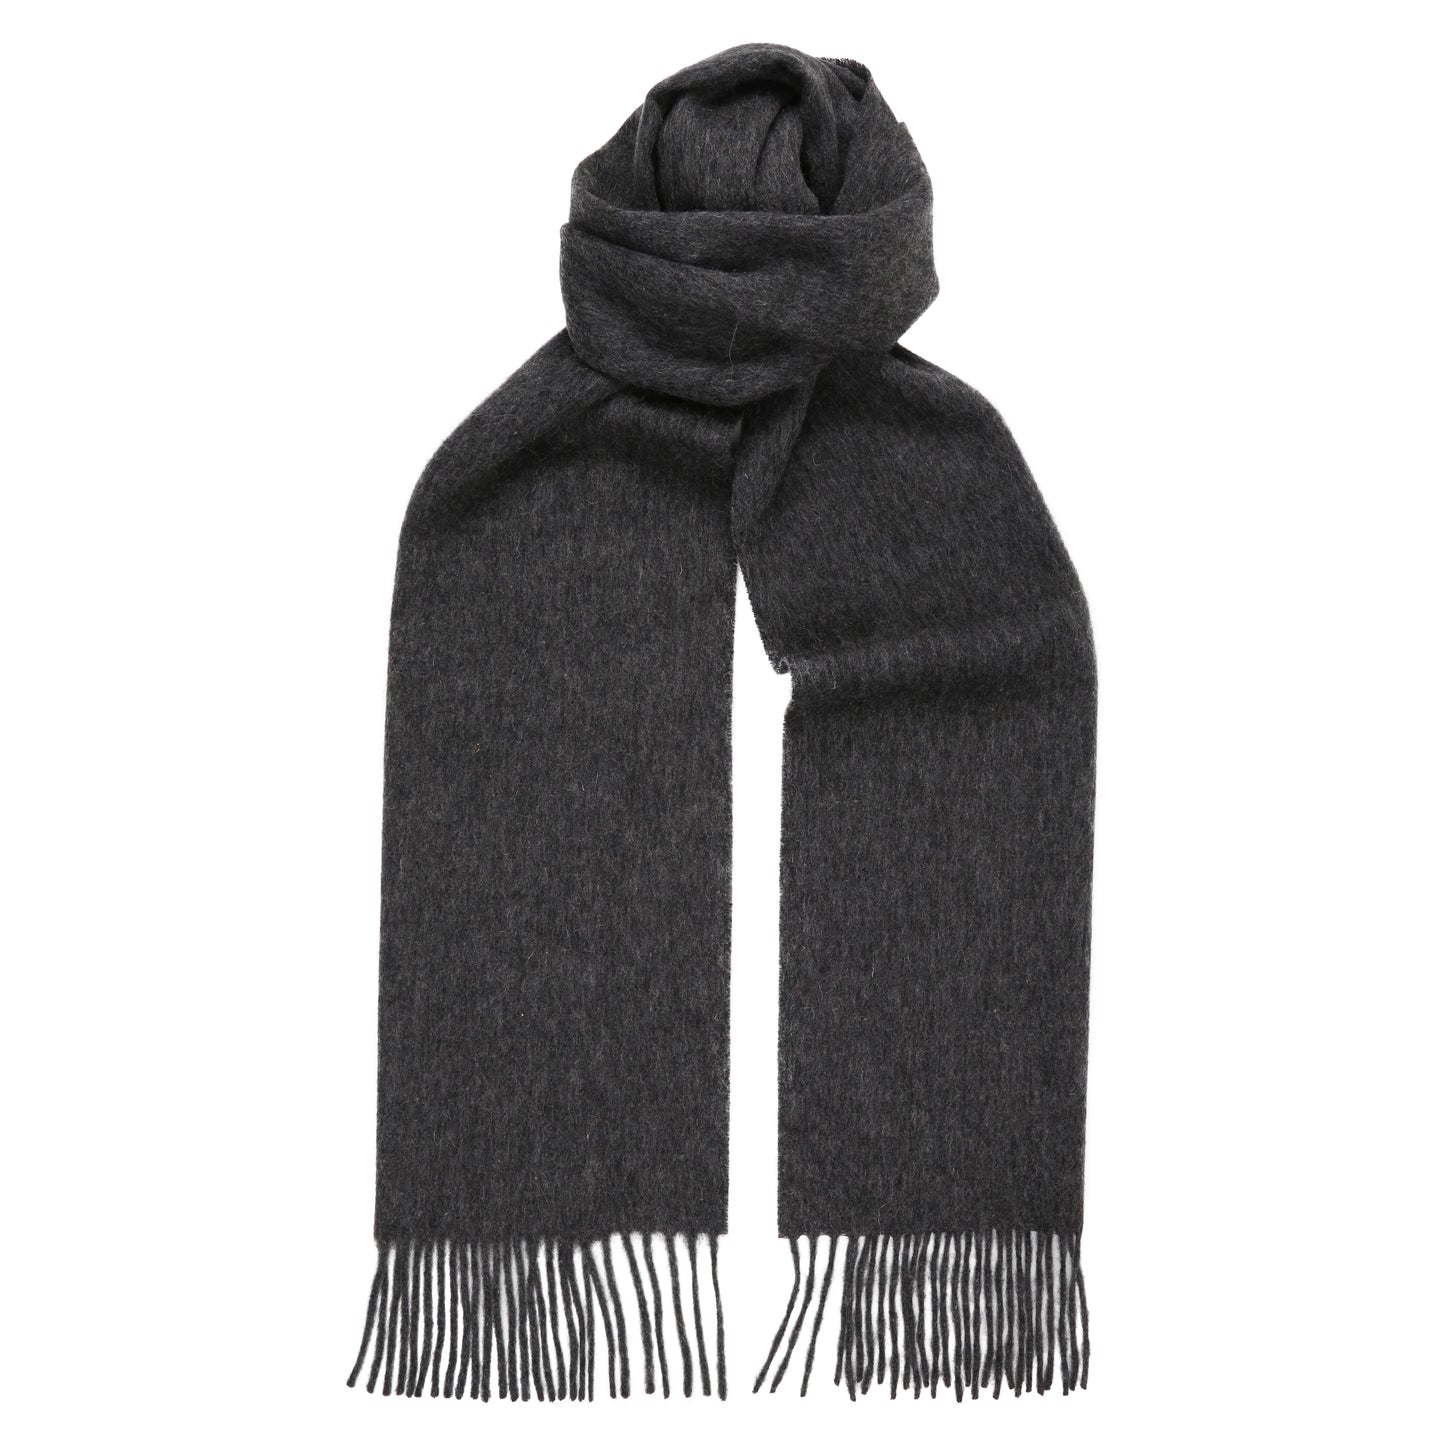 Slate Grey 100% Lambswool Long Scarf with Fringes